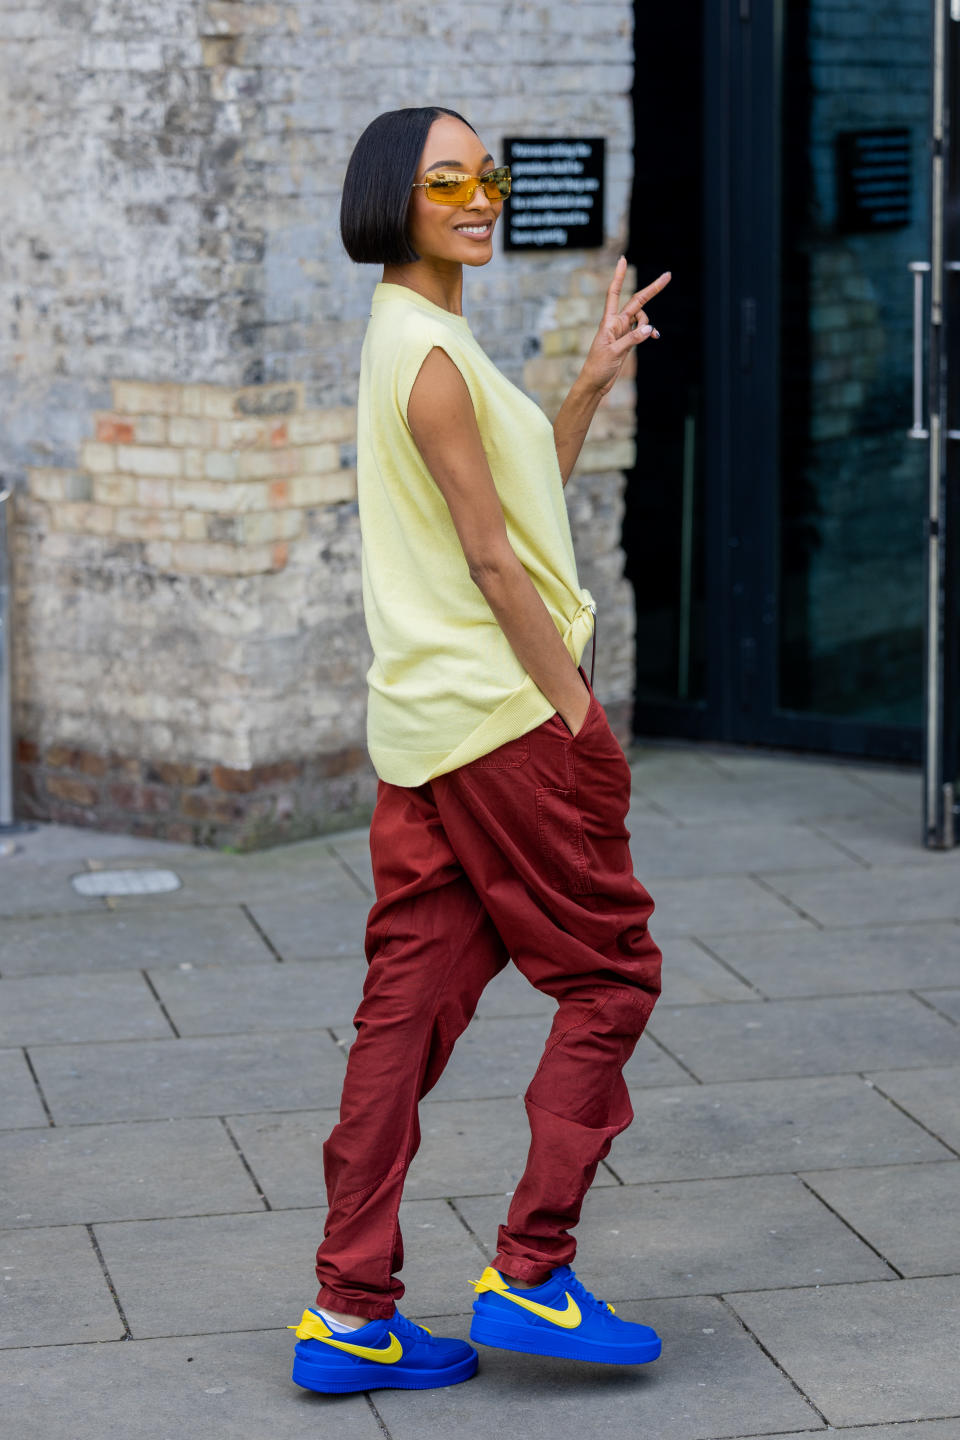 Jourdan Dunn wears yellow sleeveless top, red pants, Nike Airforce 1 sneakers, and sunglasses outside JW Anderson during London Fashion Week Fall 2023 on February 19, 2023 in London, England. (Photo by Christian Vierig/Getty Images) - Credit: Getty Images